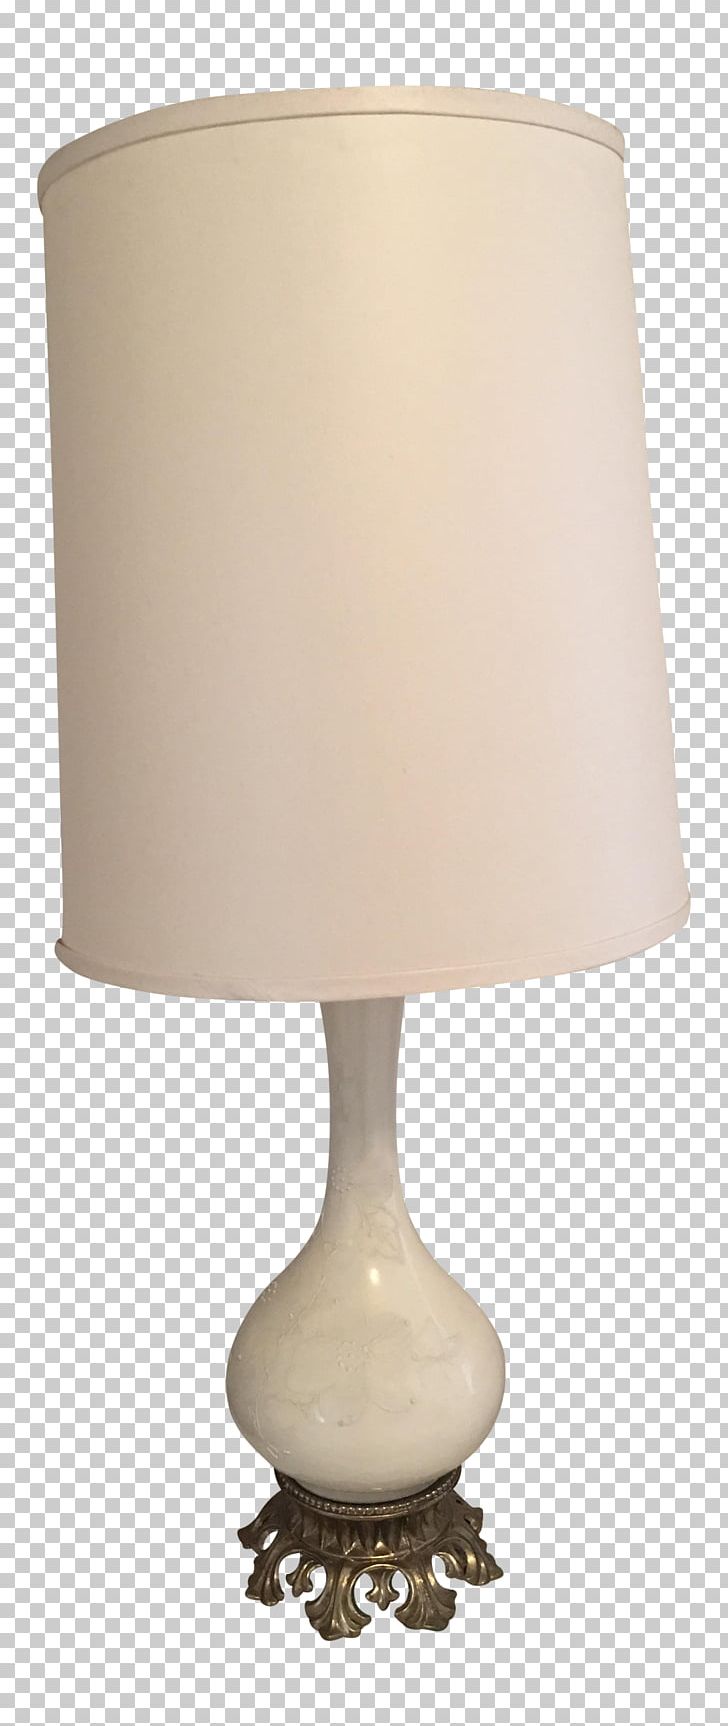 Product Design Lamp Shades Table M Lamp Restoration PNG, Clipart, Lamp, Lampshade, Lamp Shades, Light Fixture, Lighting Free PNG Download